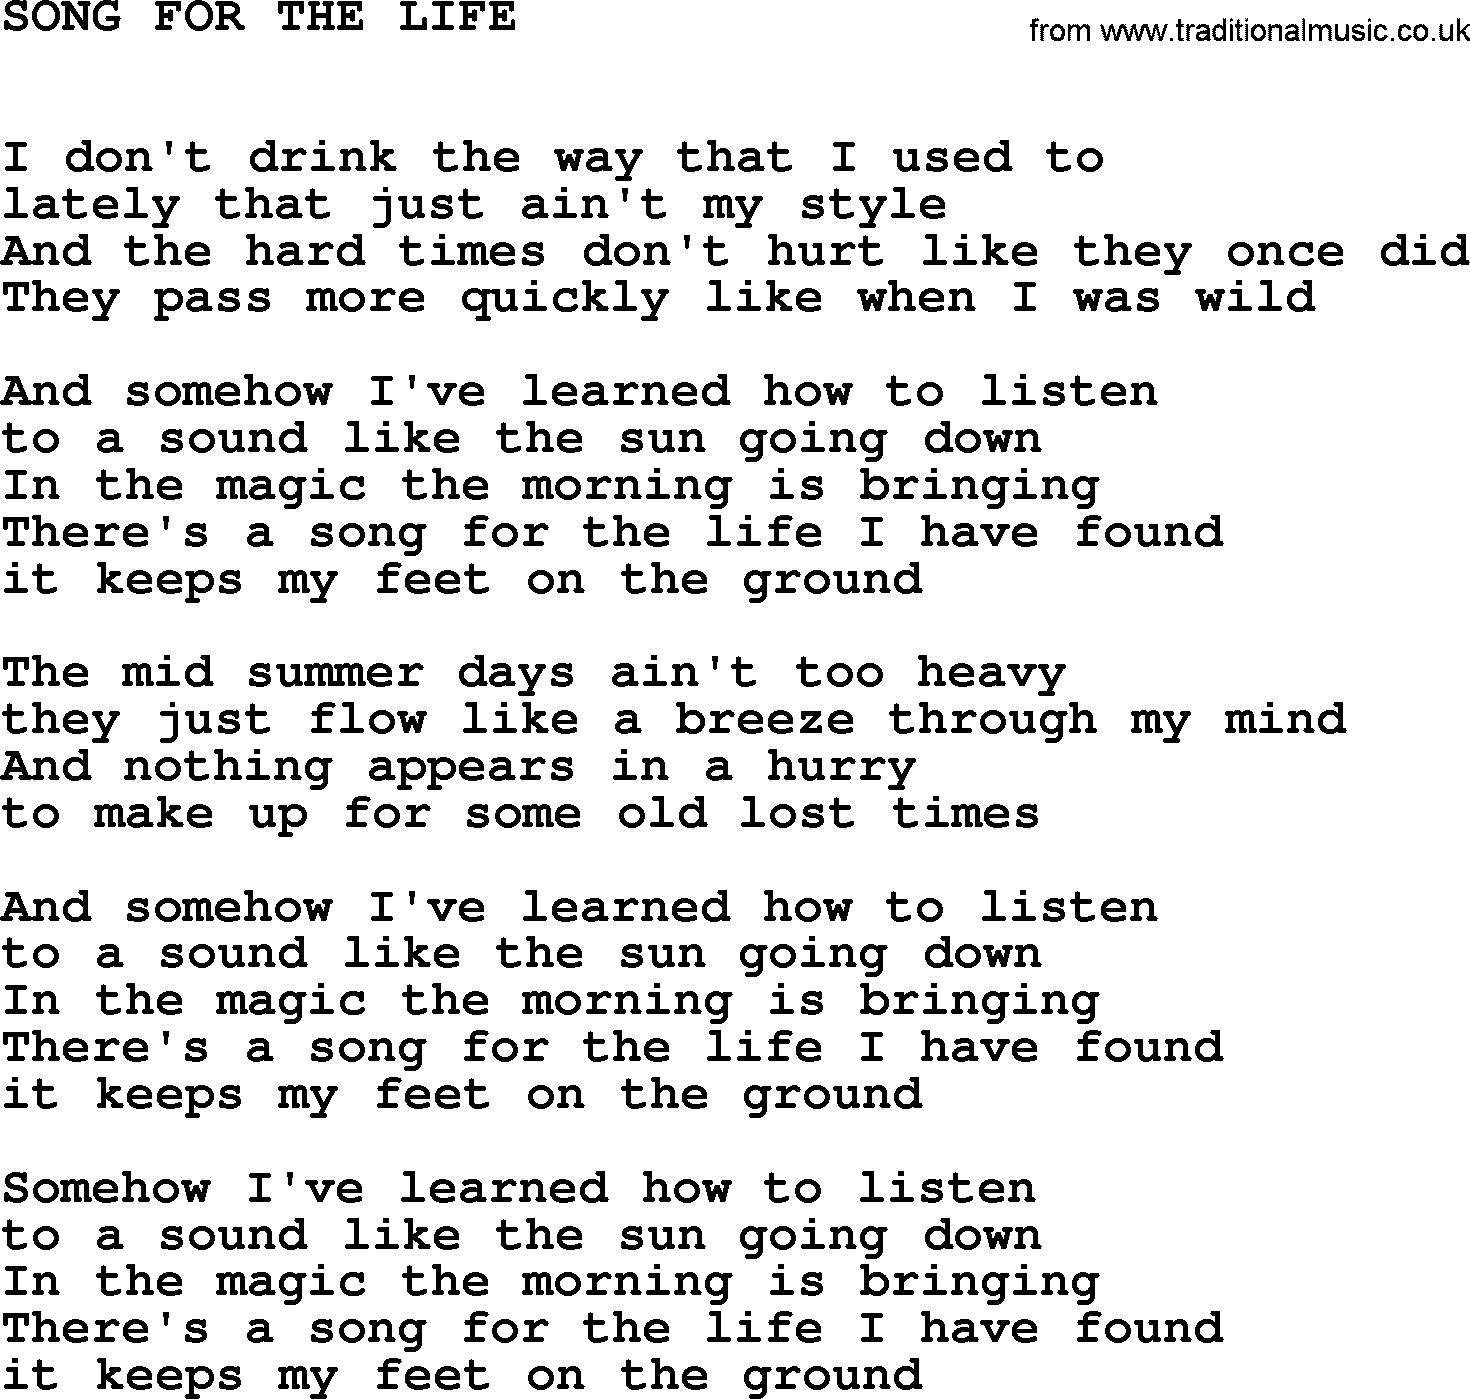 Johnny Cash song Song For The Life.txt lyrics